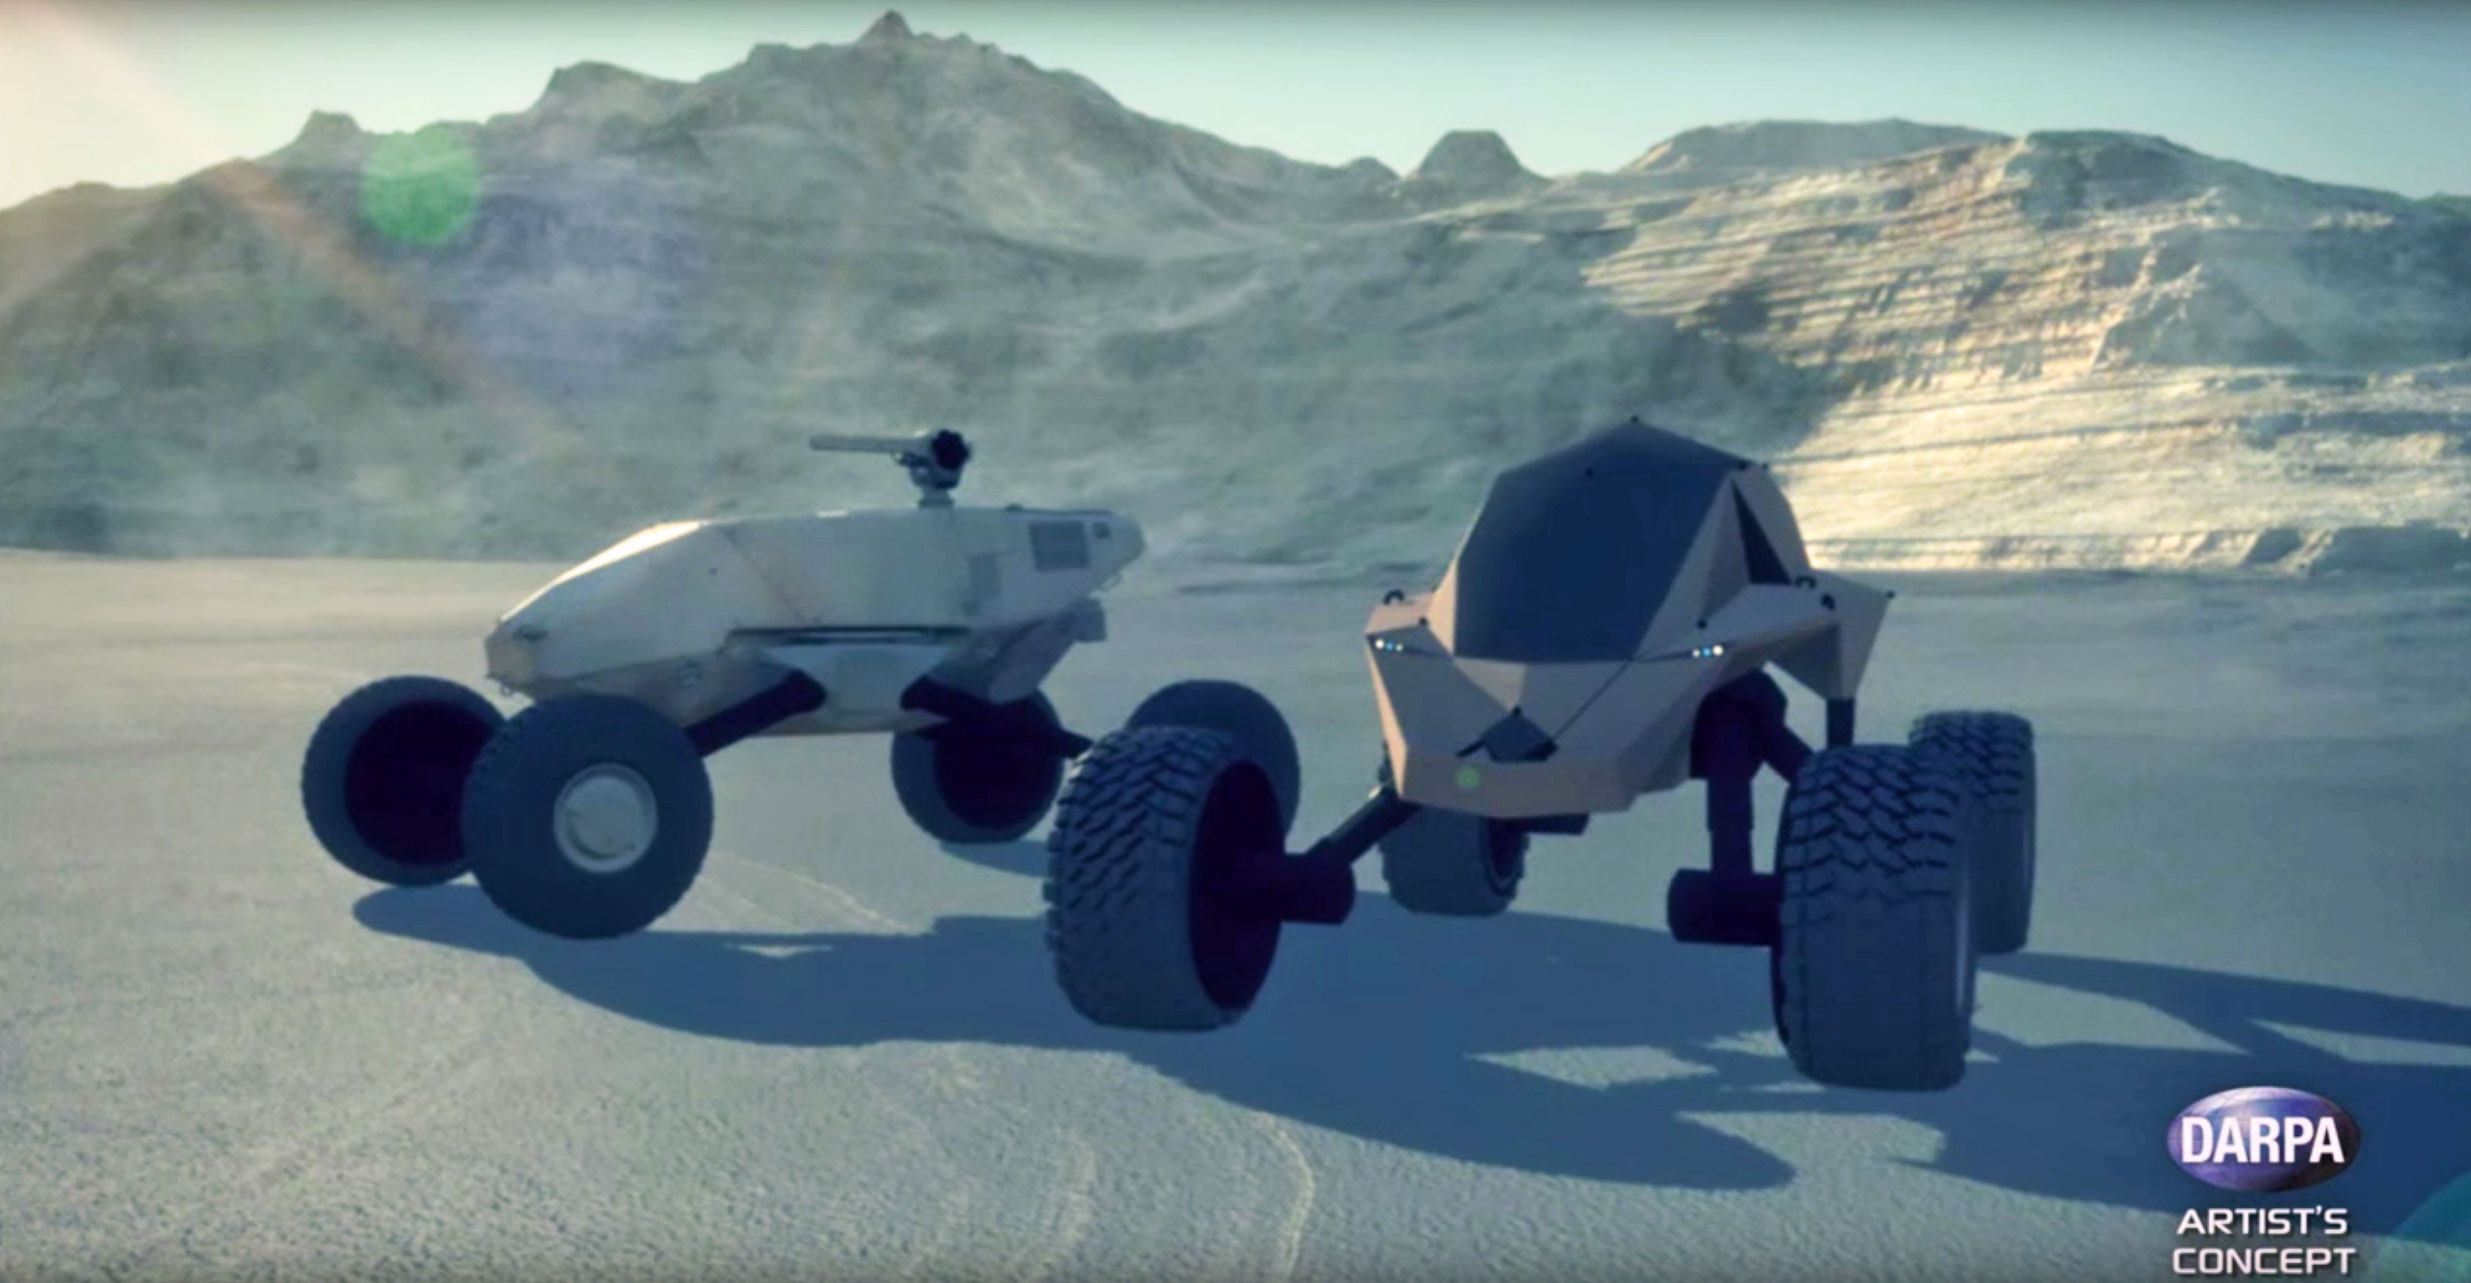 DARPA is developing smarter, faster armored vehicles